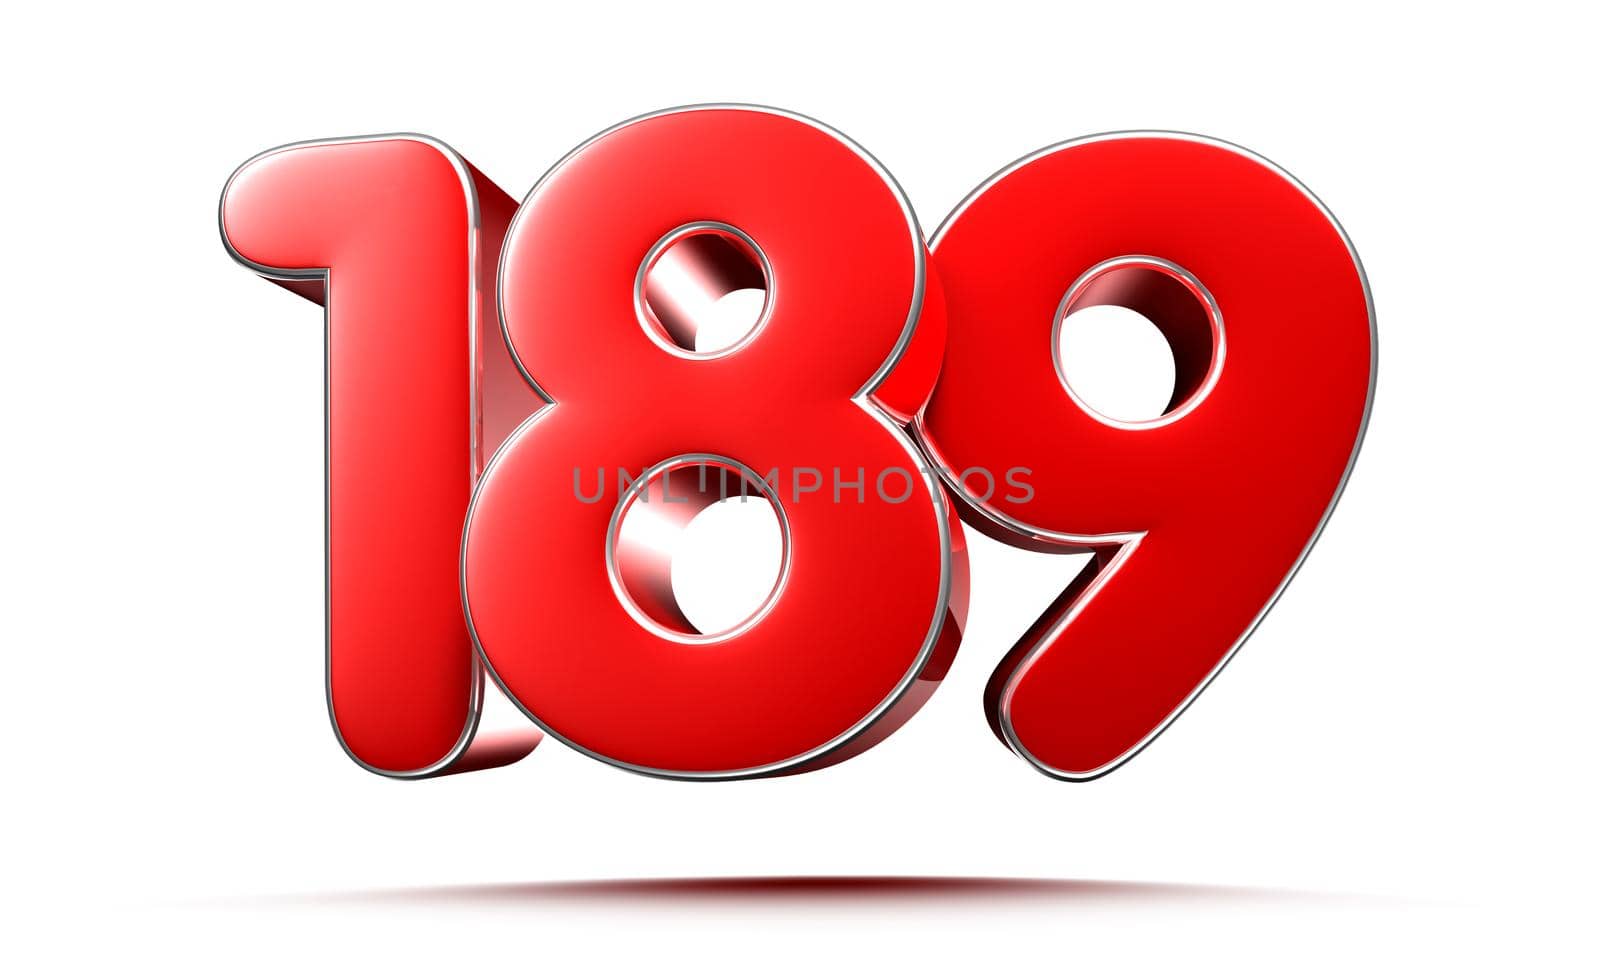 Rounded red numbers 189 on white background 3D illustration with clipping path